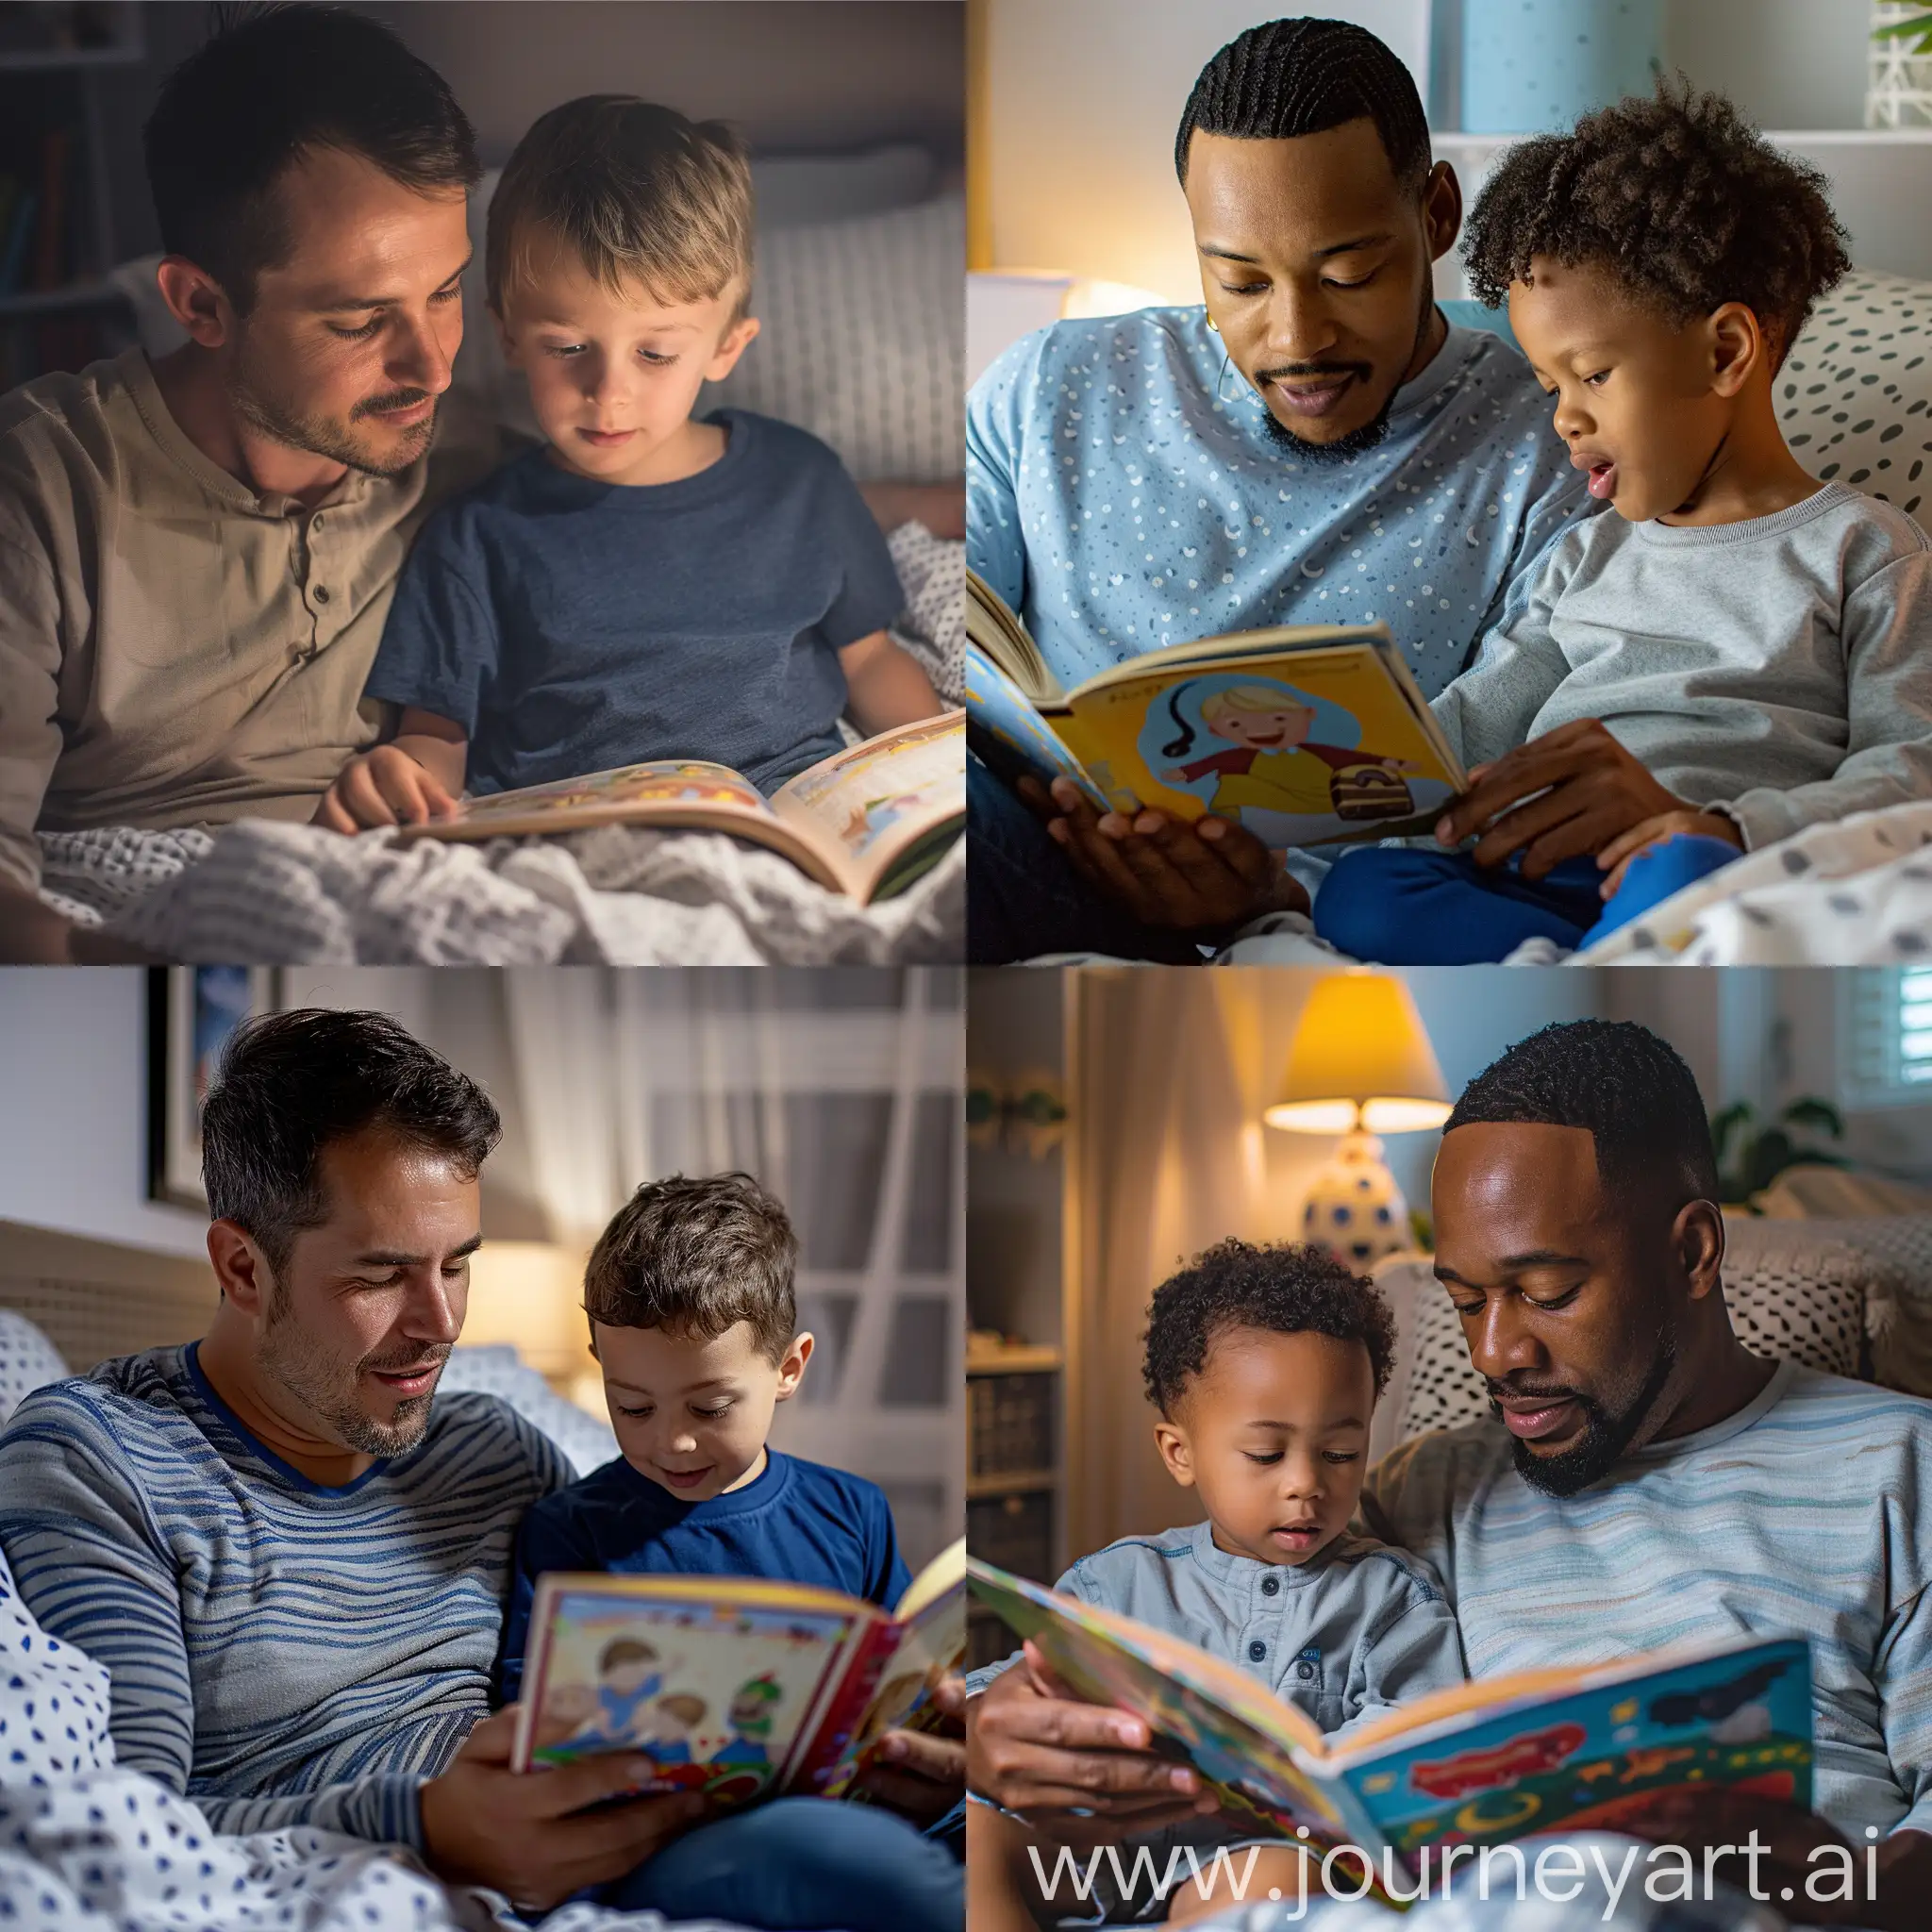 Show me an image of a dad reading a bedtime story to his 6 year old son